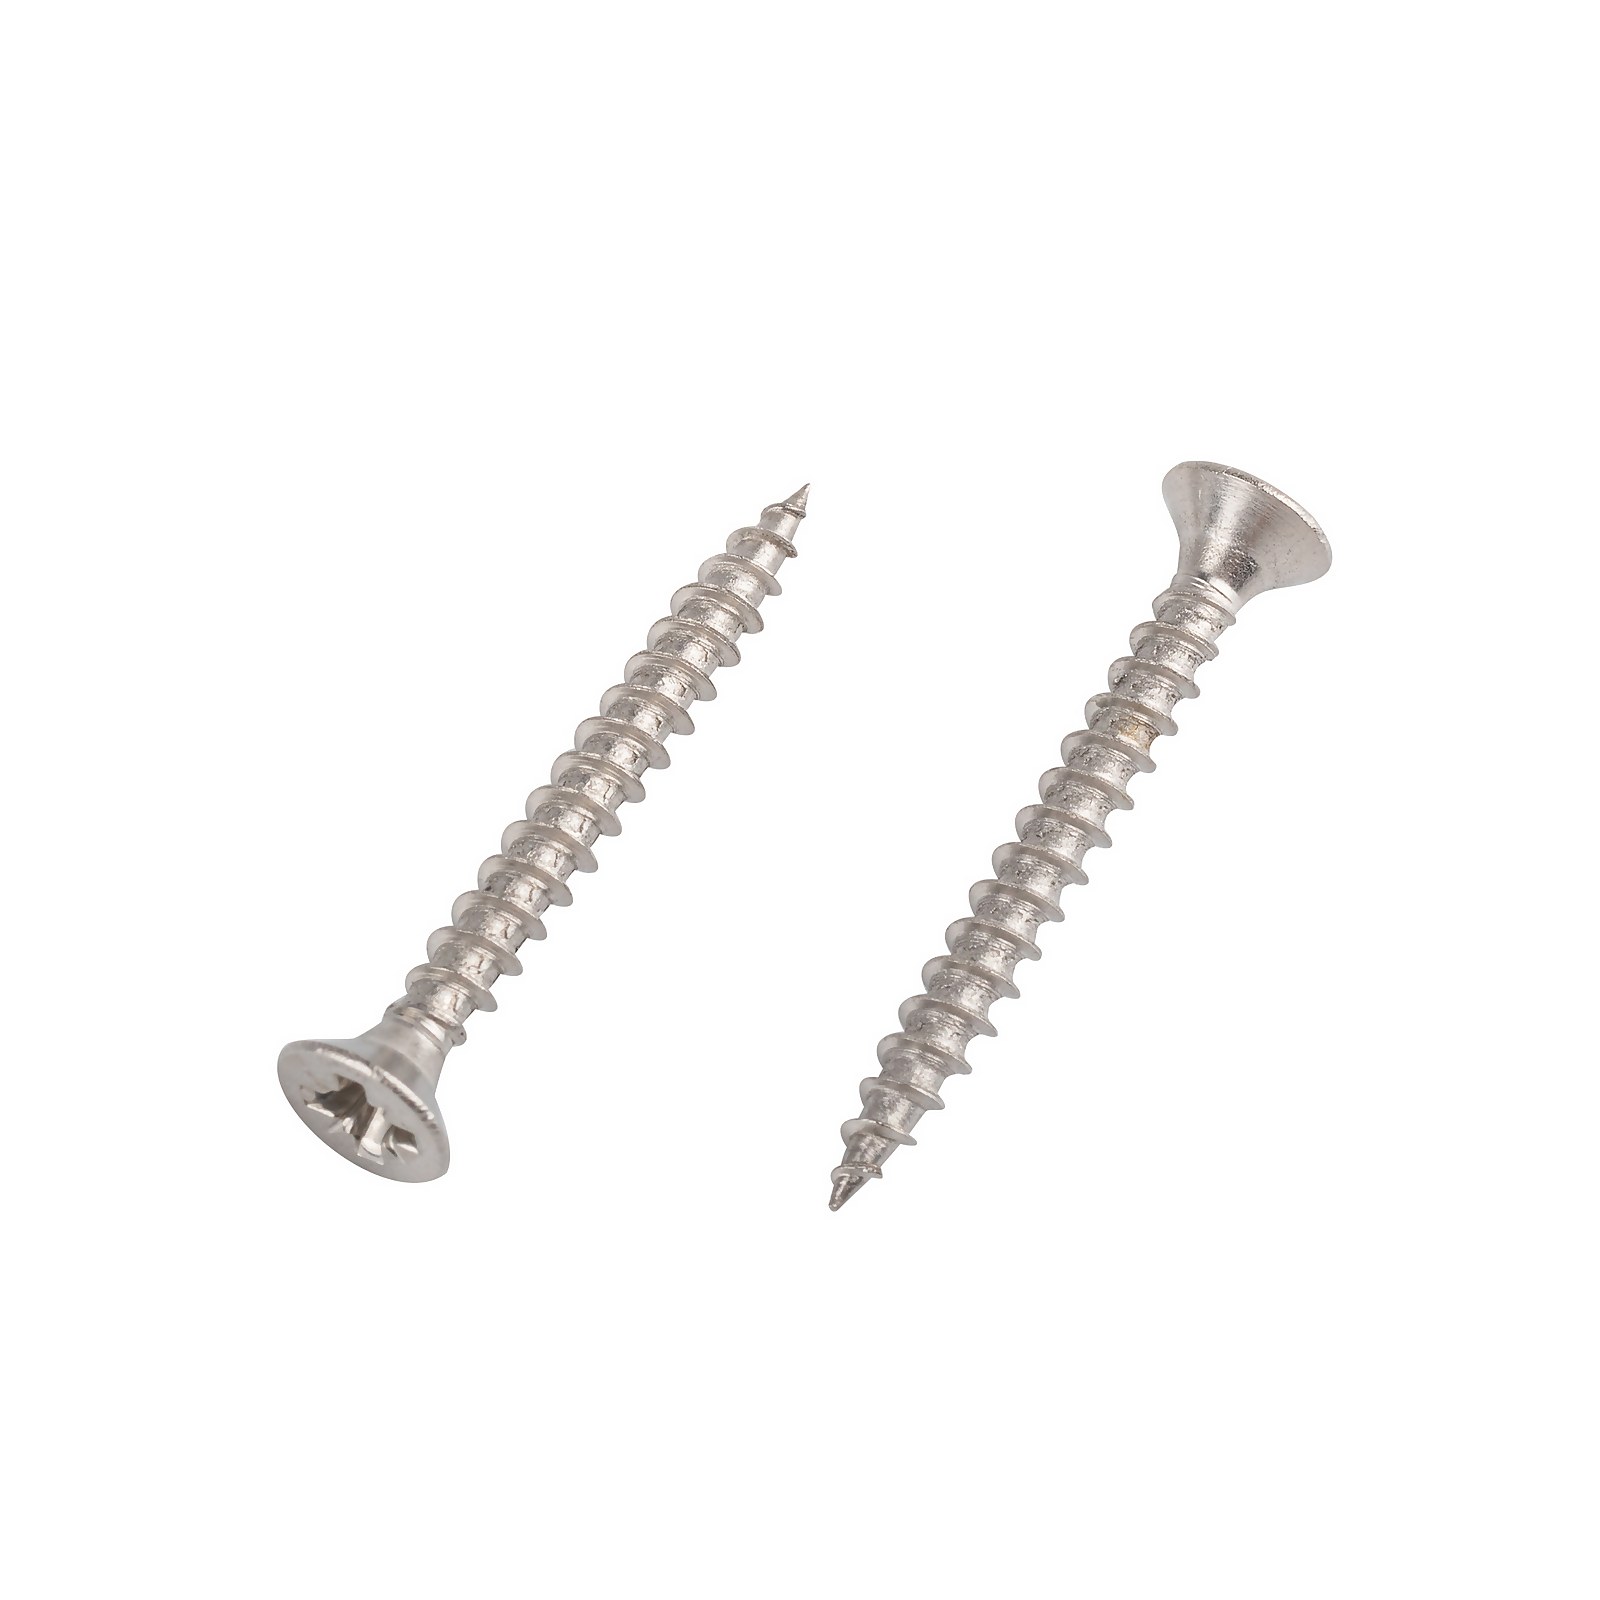 Photo of Homebase Stainless Steel Single Thread Screw 3.5 X 30mm 25 Pack